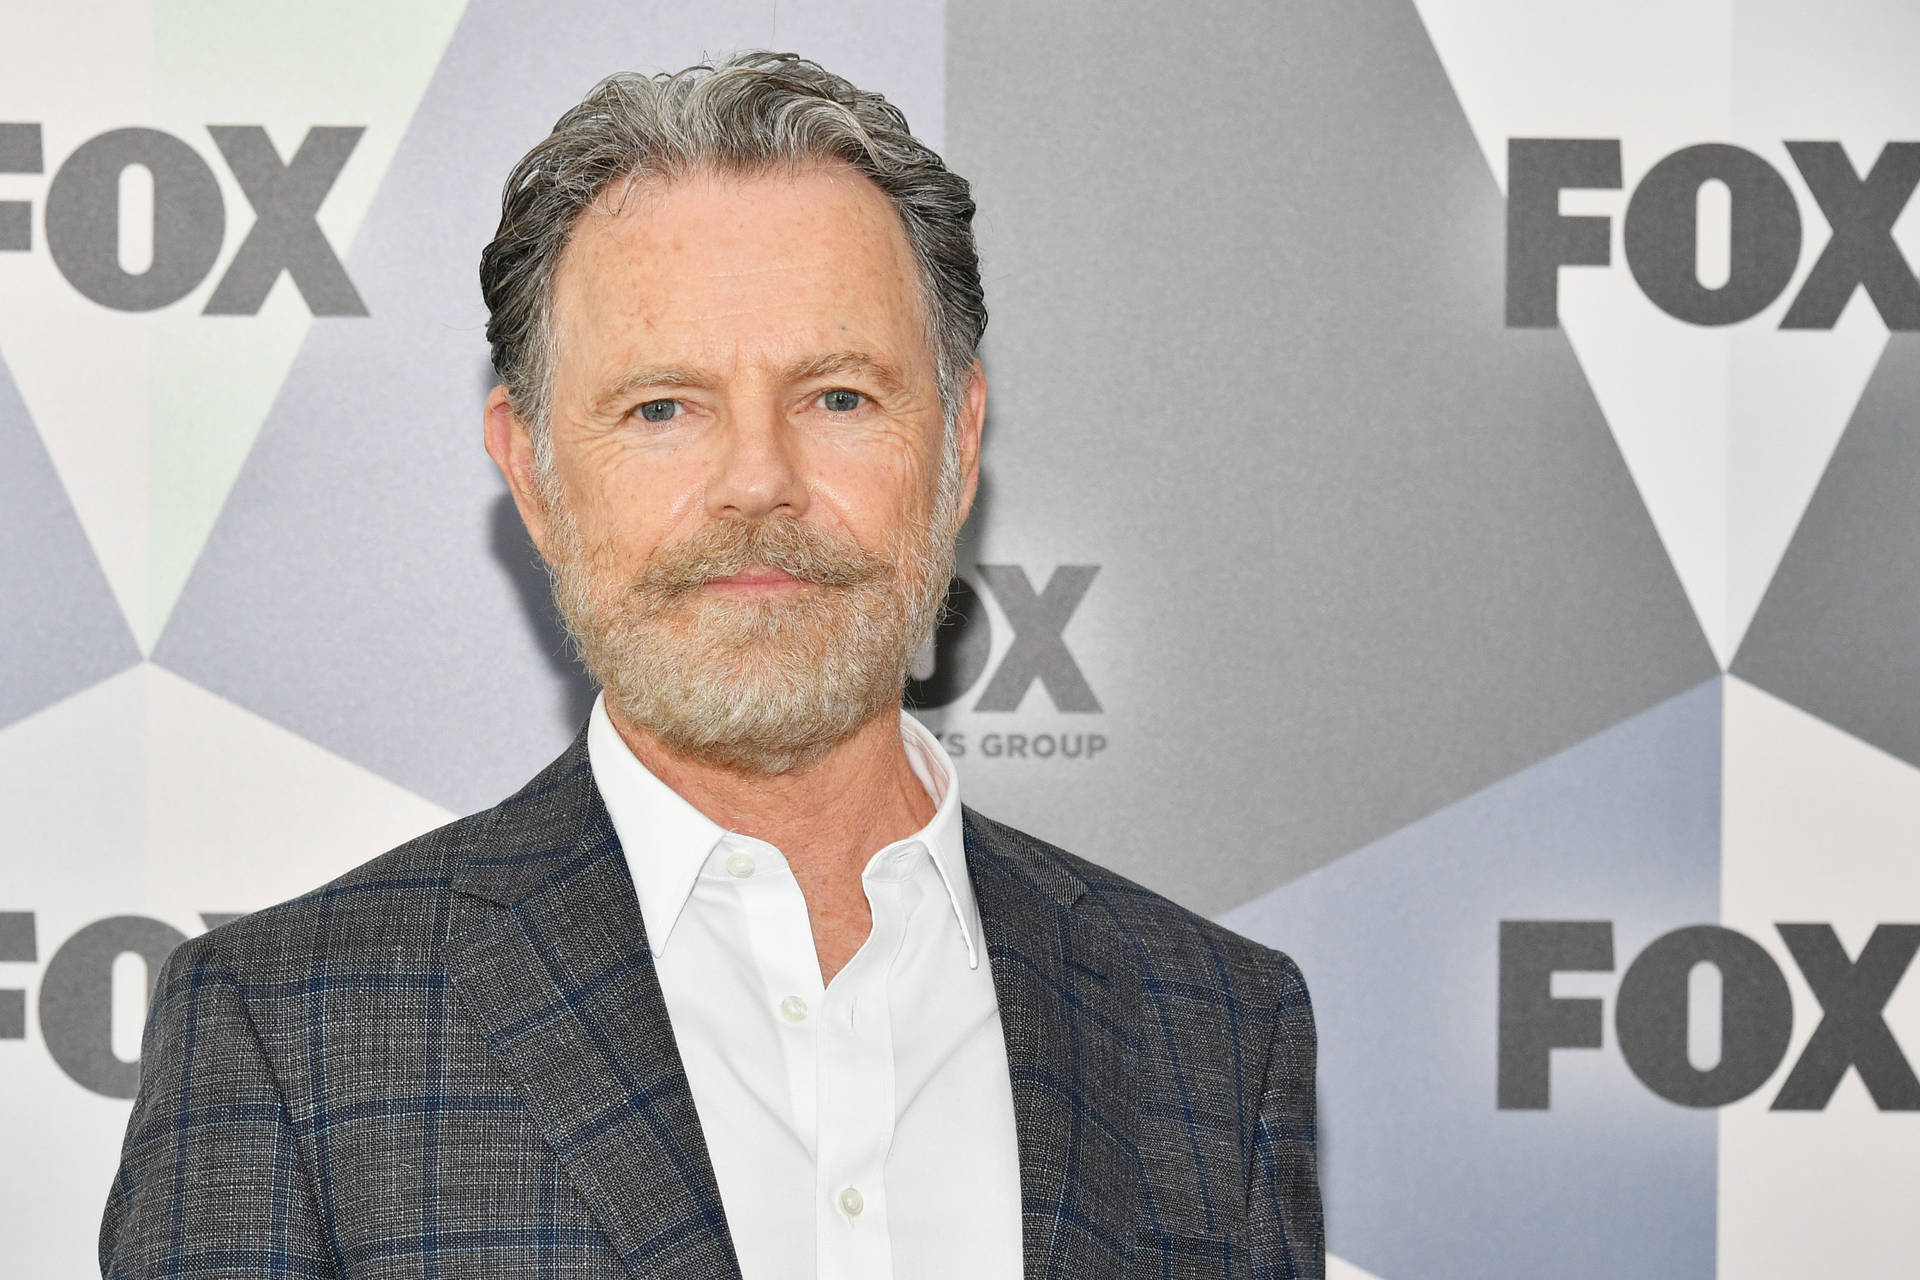 Actorbruce Greenwood Premiere In Spanish Would Be 